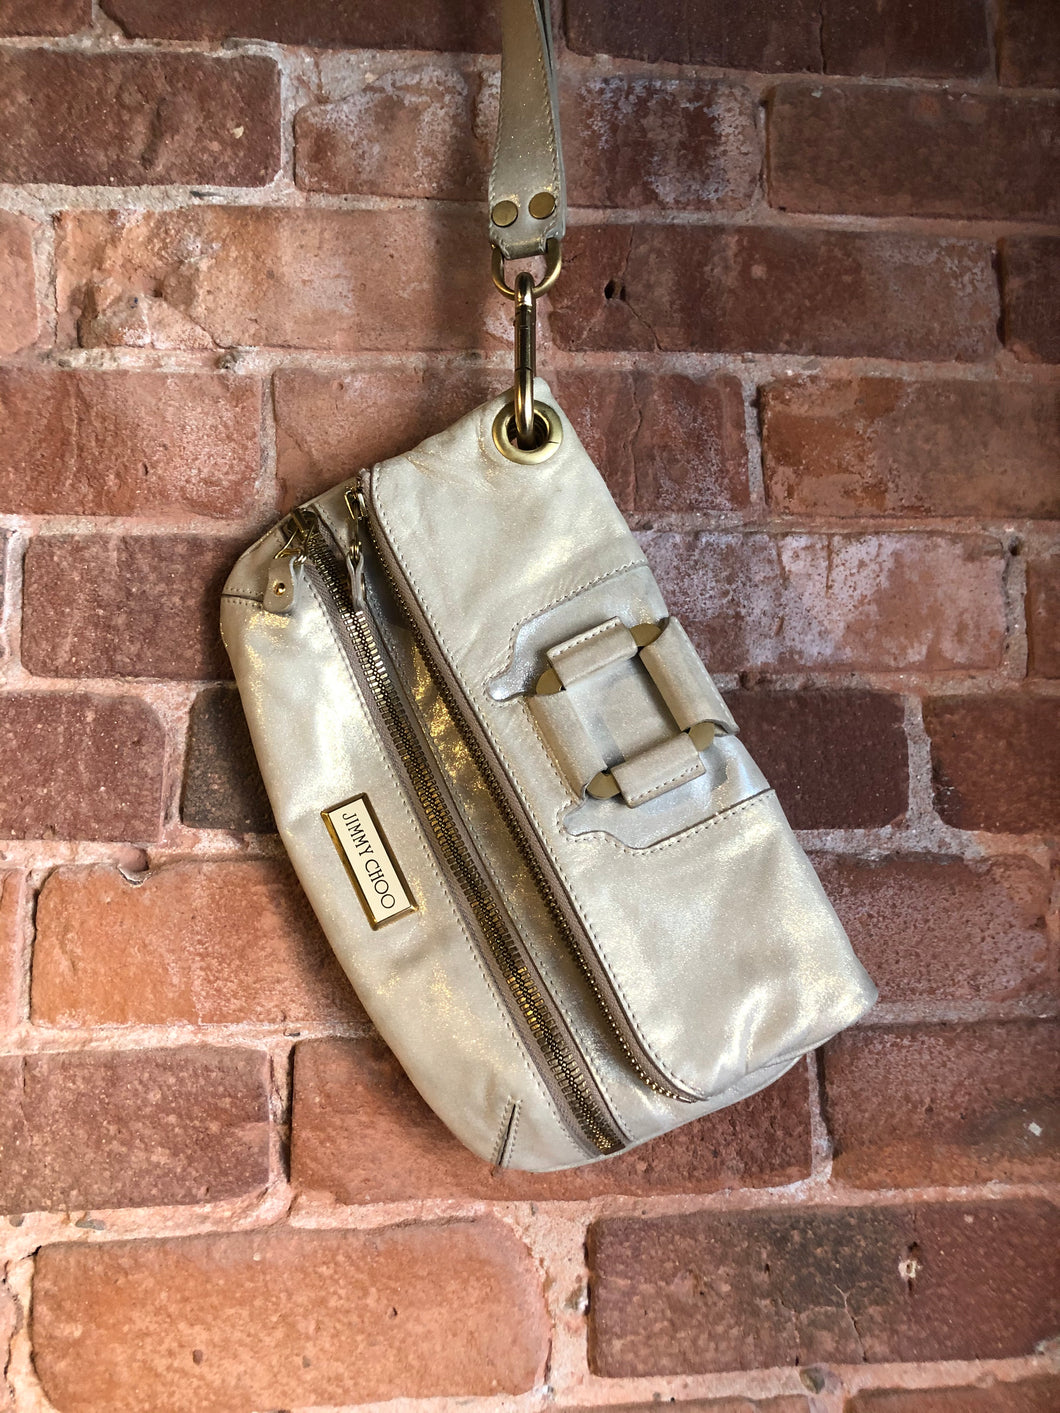 Kingspier Vintage - Authentic Jimmy Choo Mave foldover clutch in Iridescent white calfskin leather with gold hardware, suede lining, magnetic snap and zip closures.